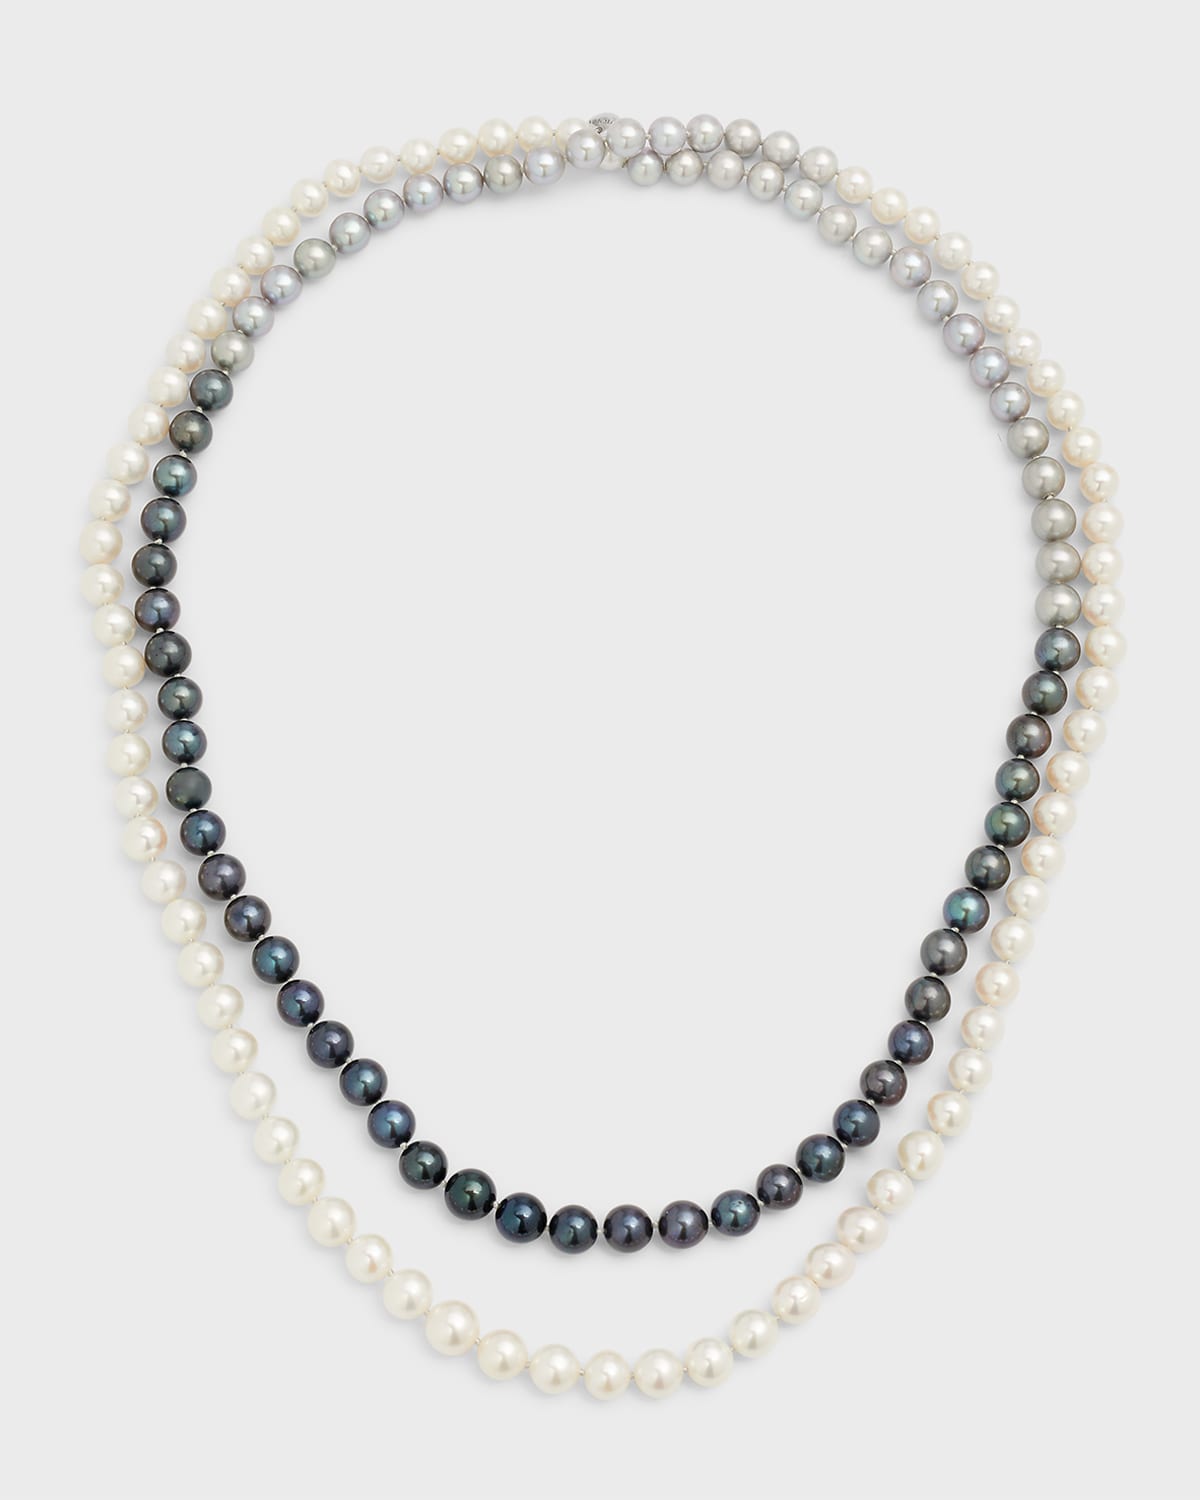 Utopia 18k White Gold Necklace With Multihued Pearls, 7-9mm